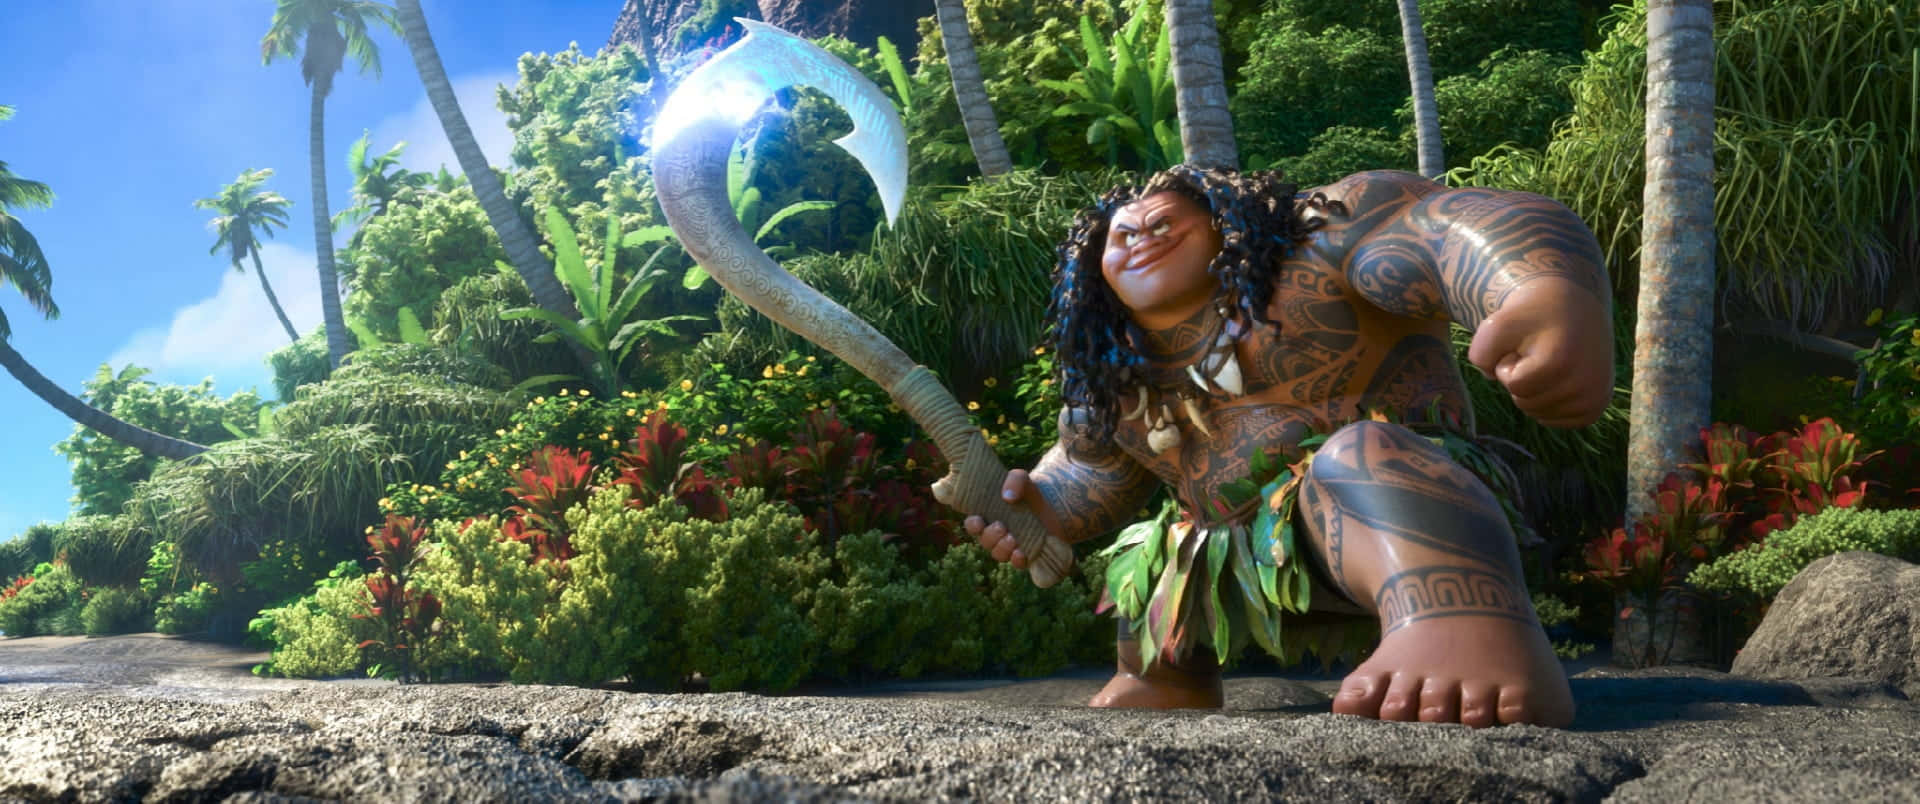 Join Moana on her epic journey and become part of her incredible story